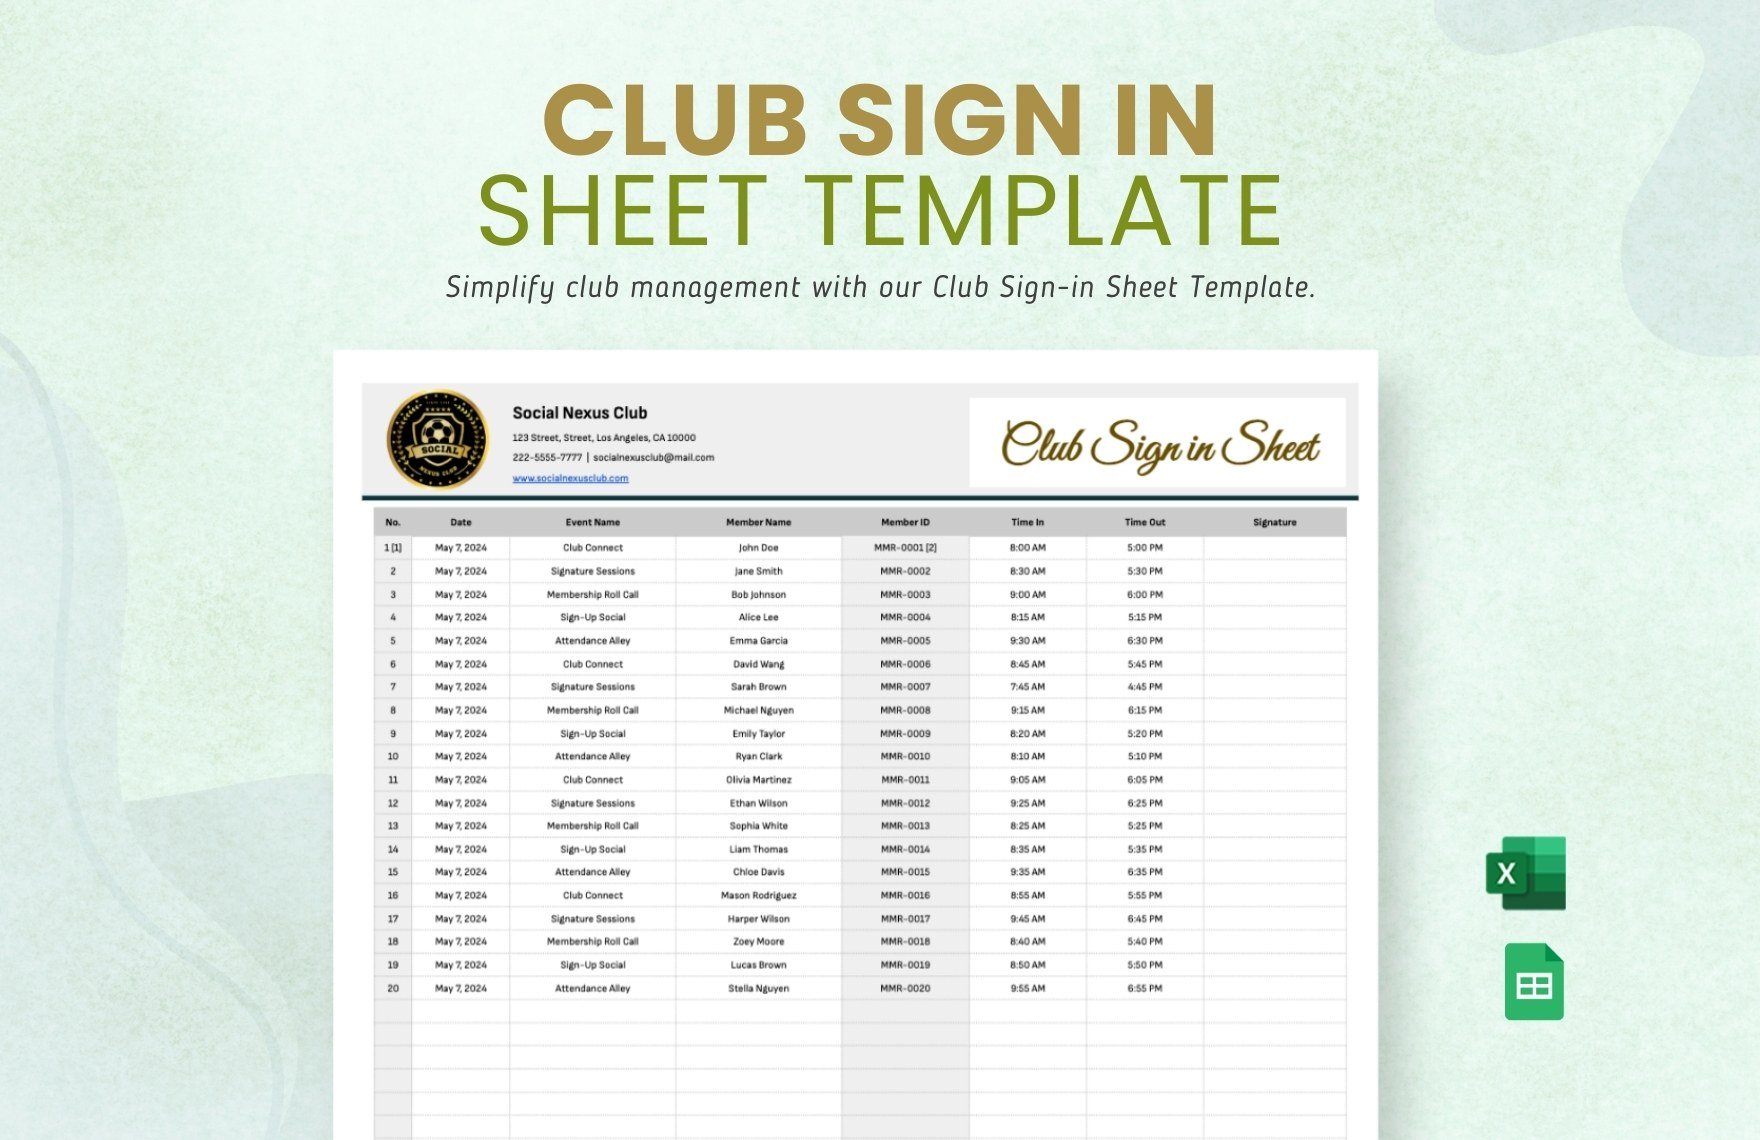 Club Sign in Sheet Template